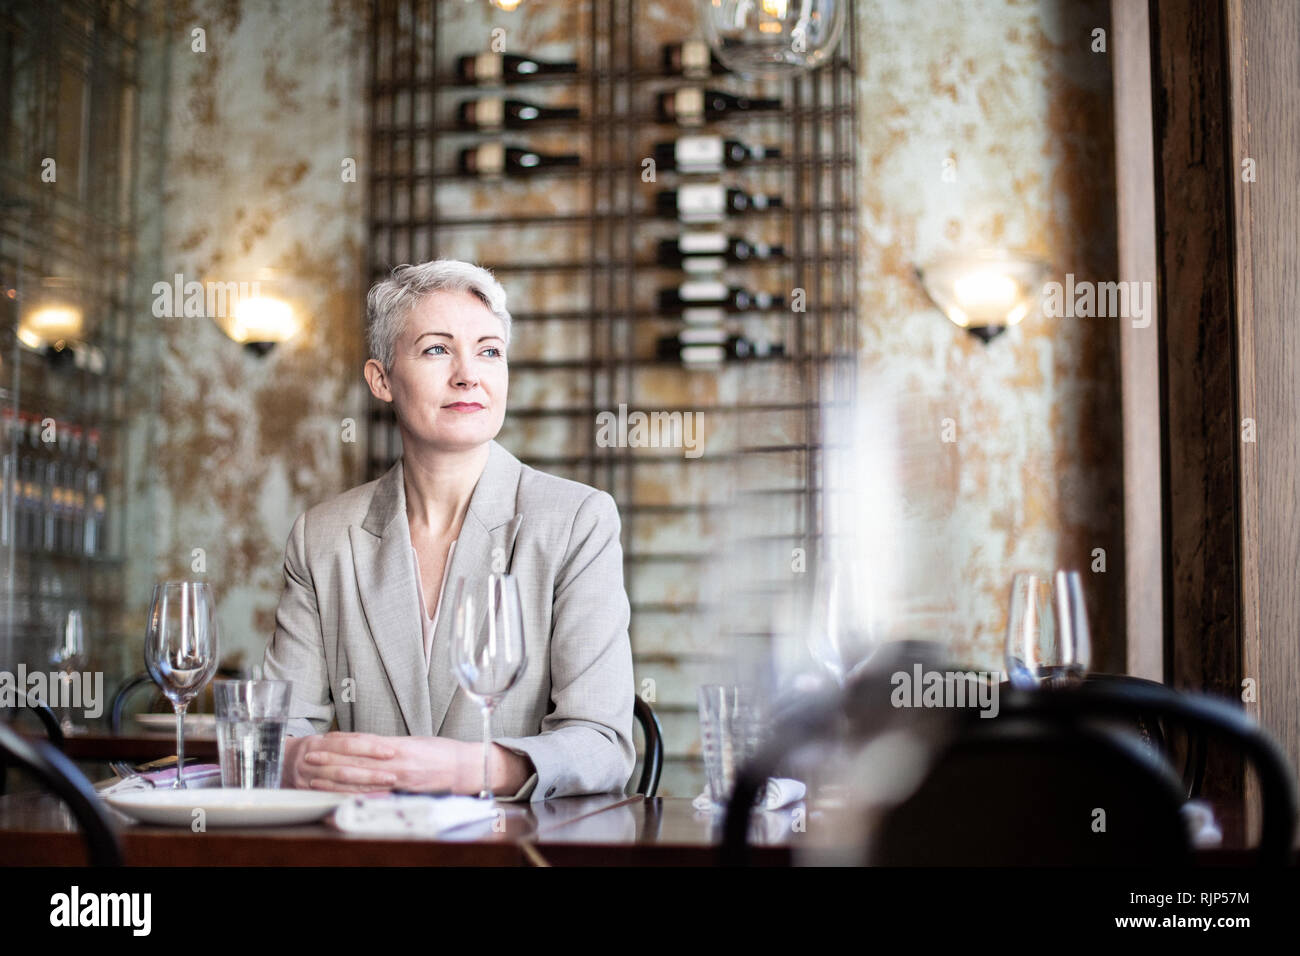 Successful businesswoman thinking in a restaurant Stock Photo